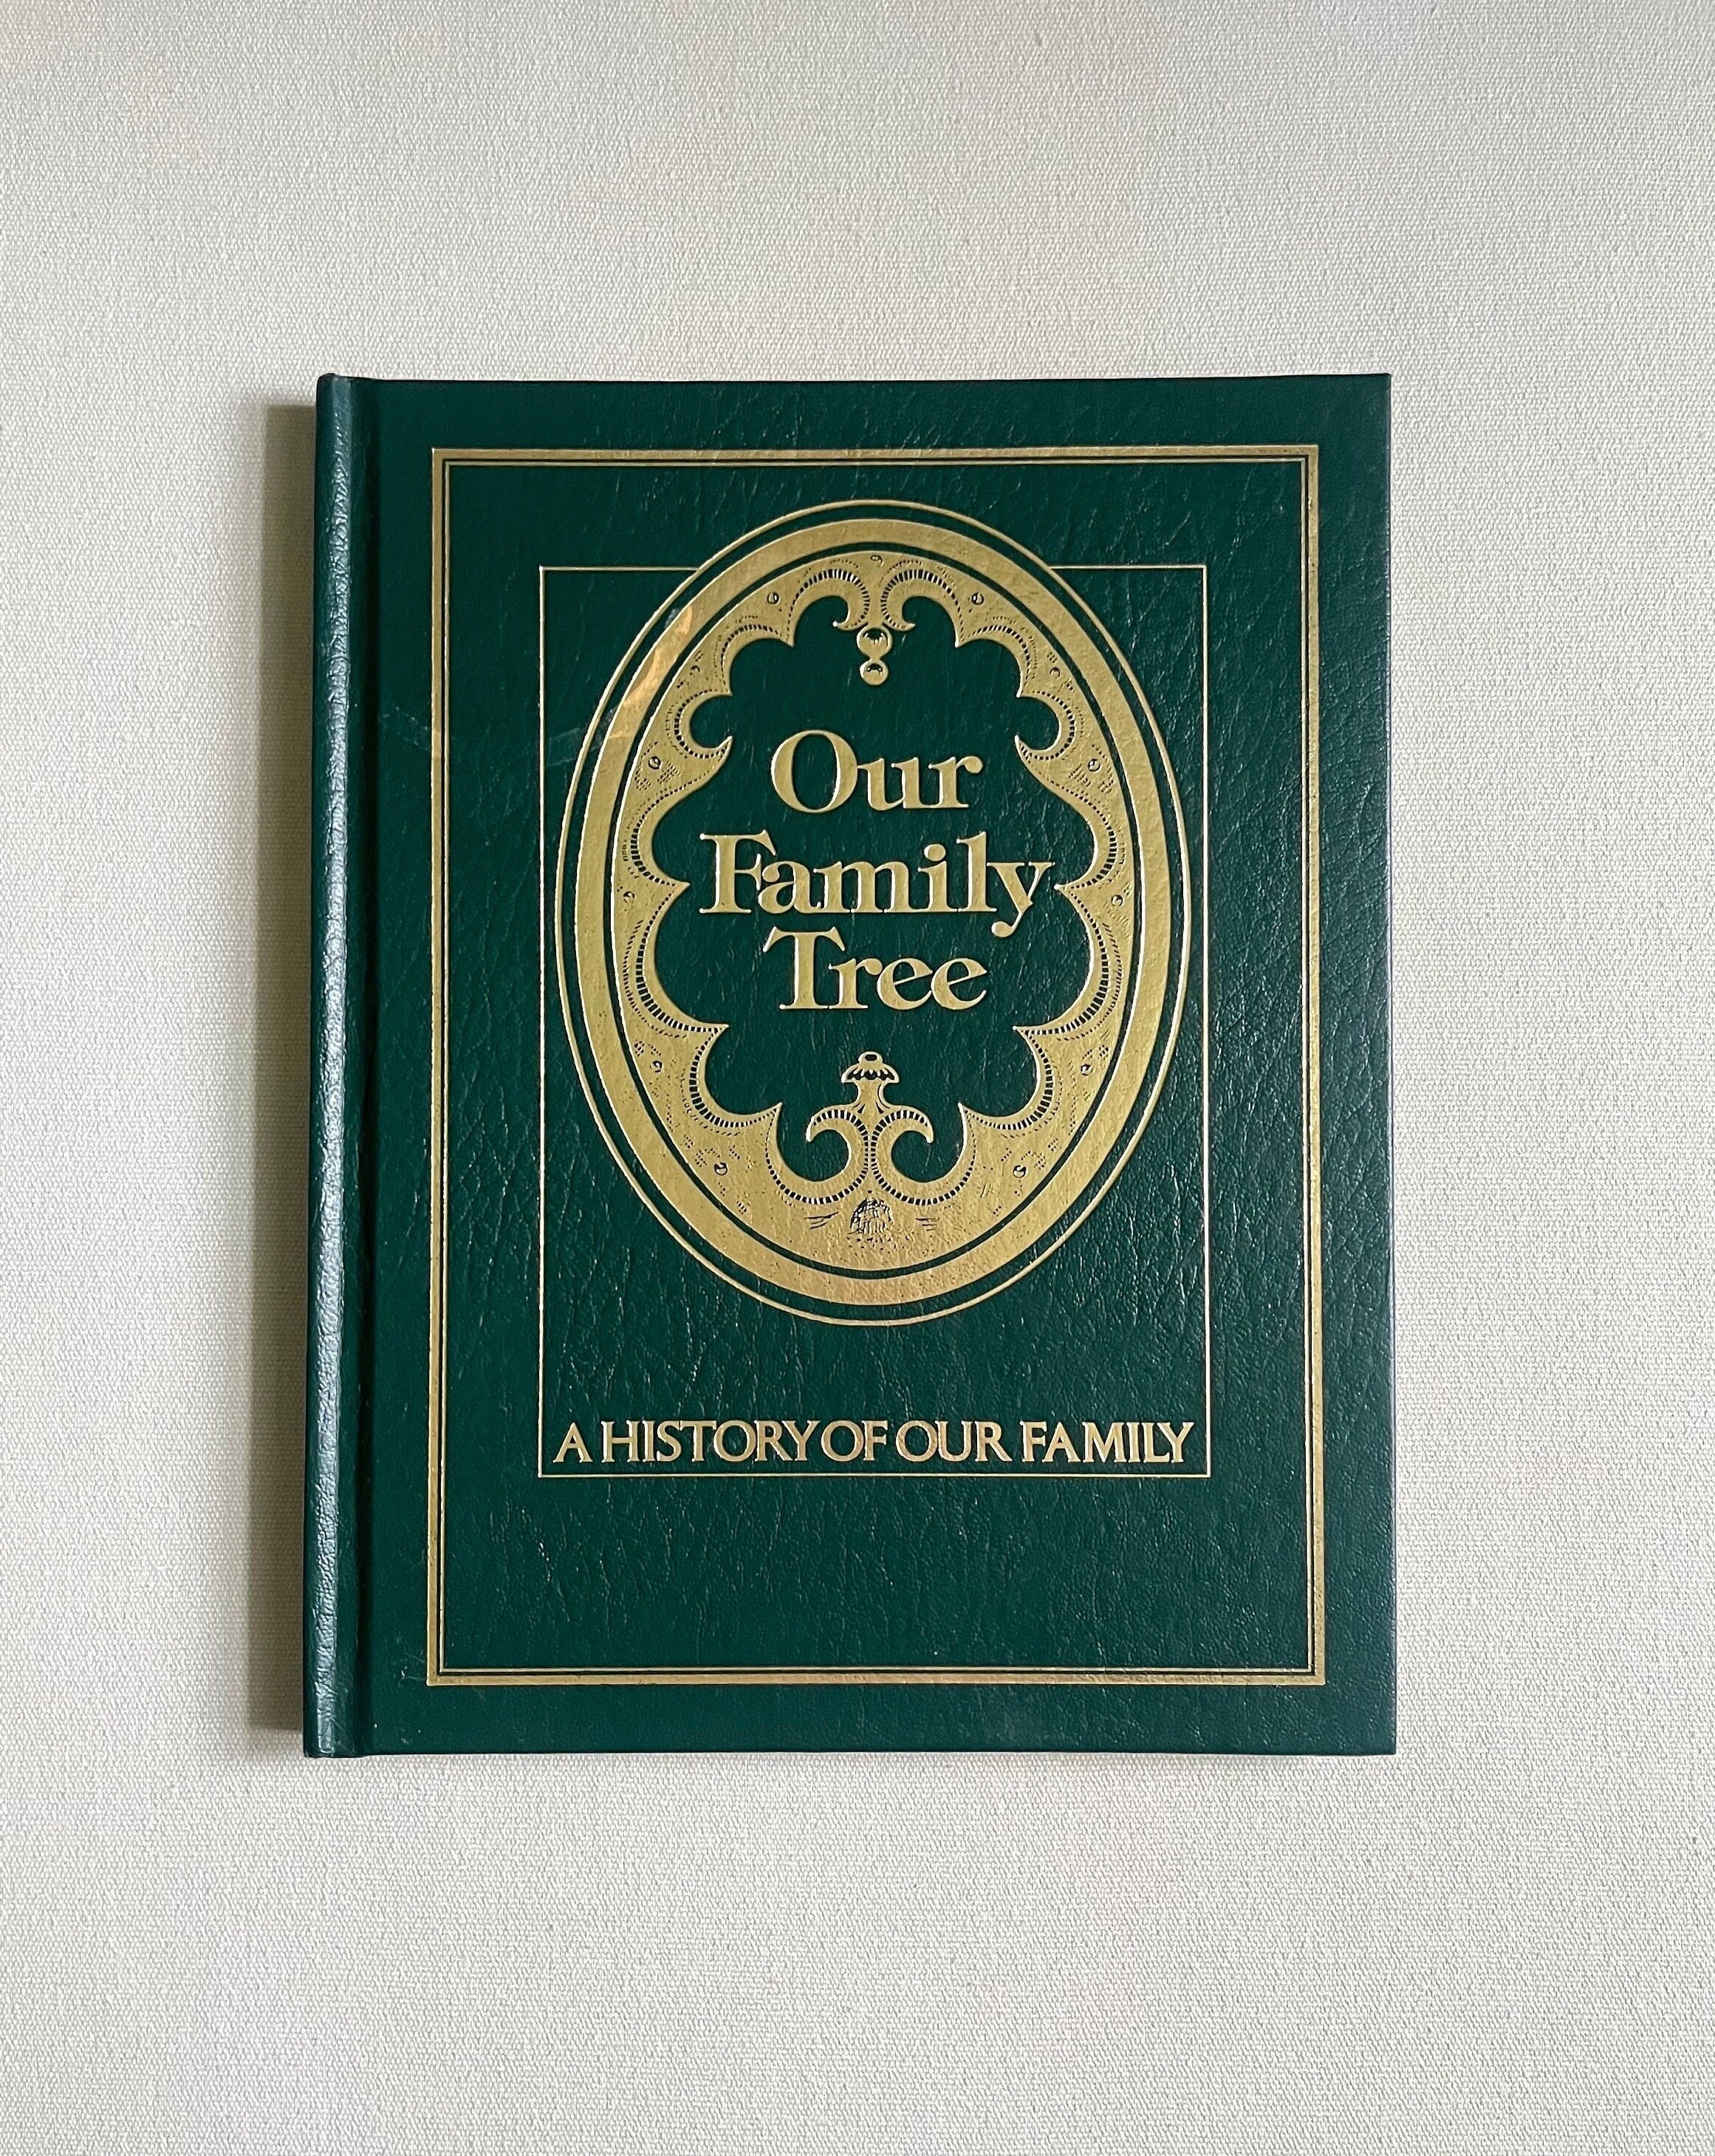 Our Family Tree: A History of Our Family [Book]